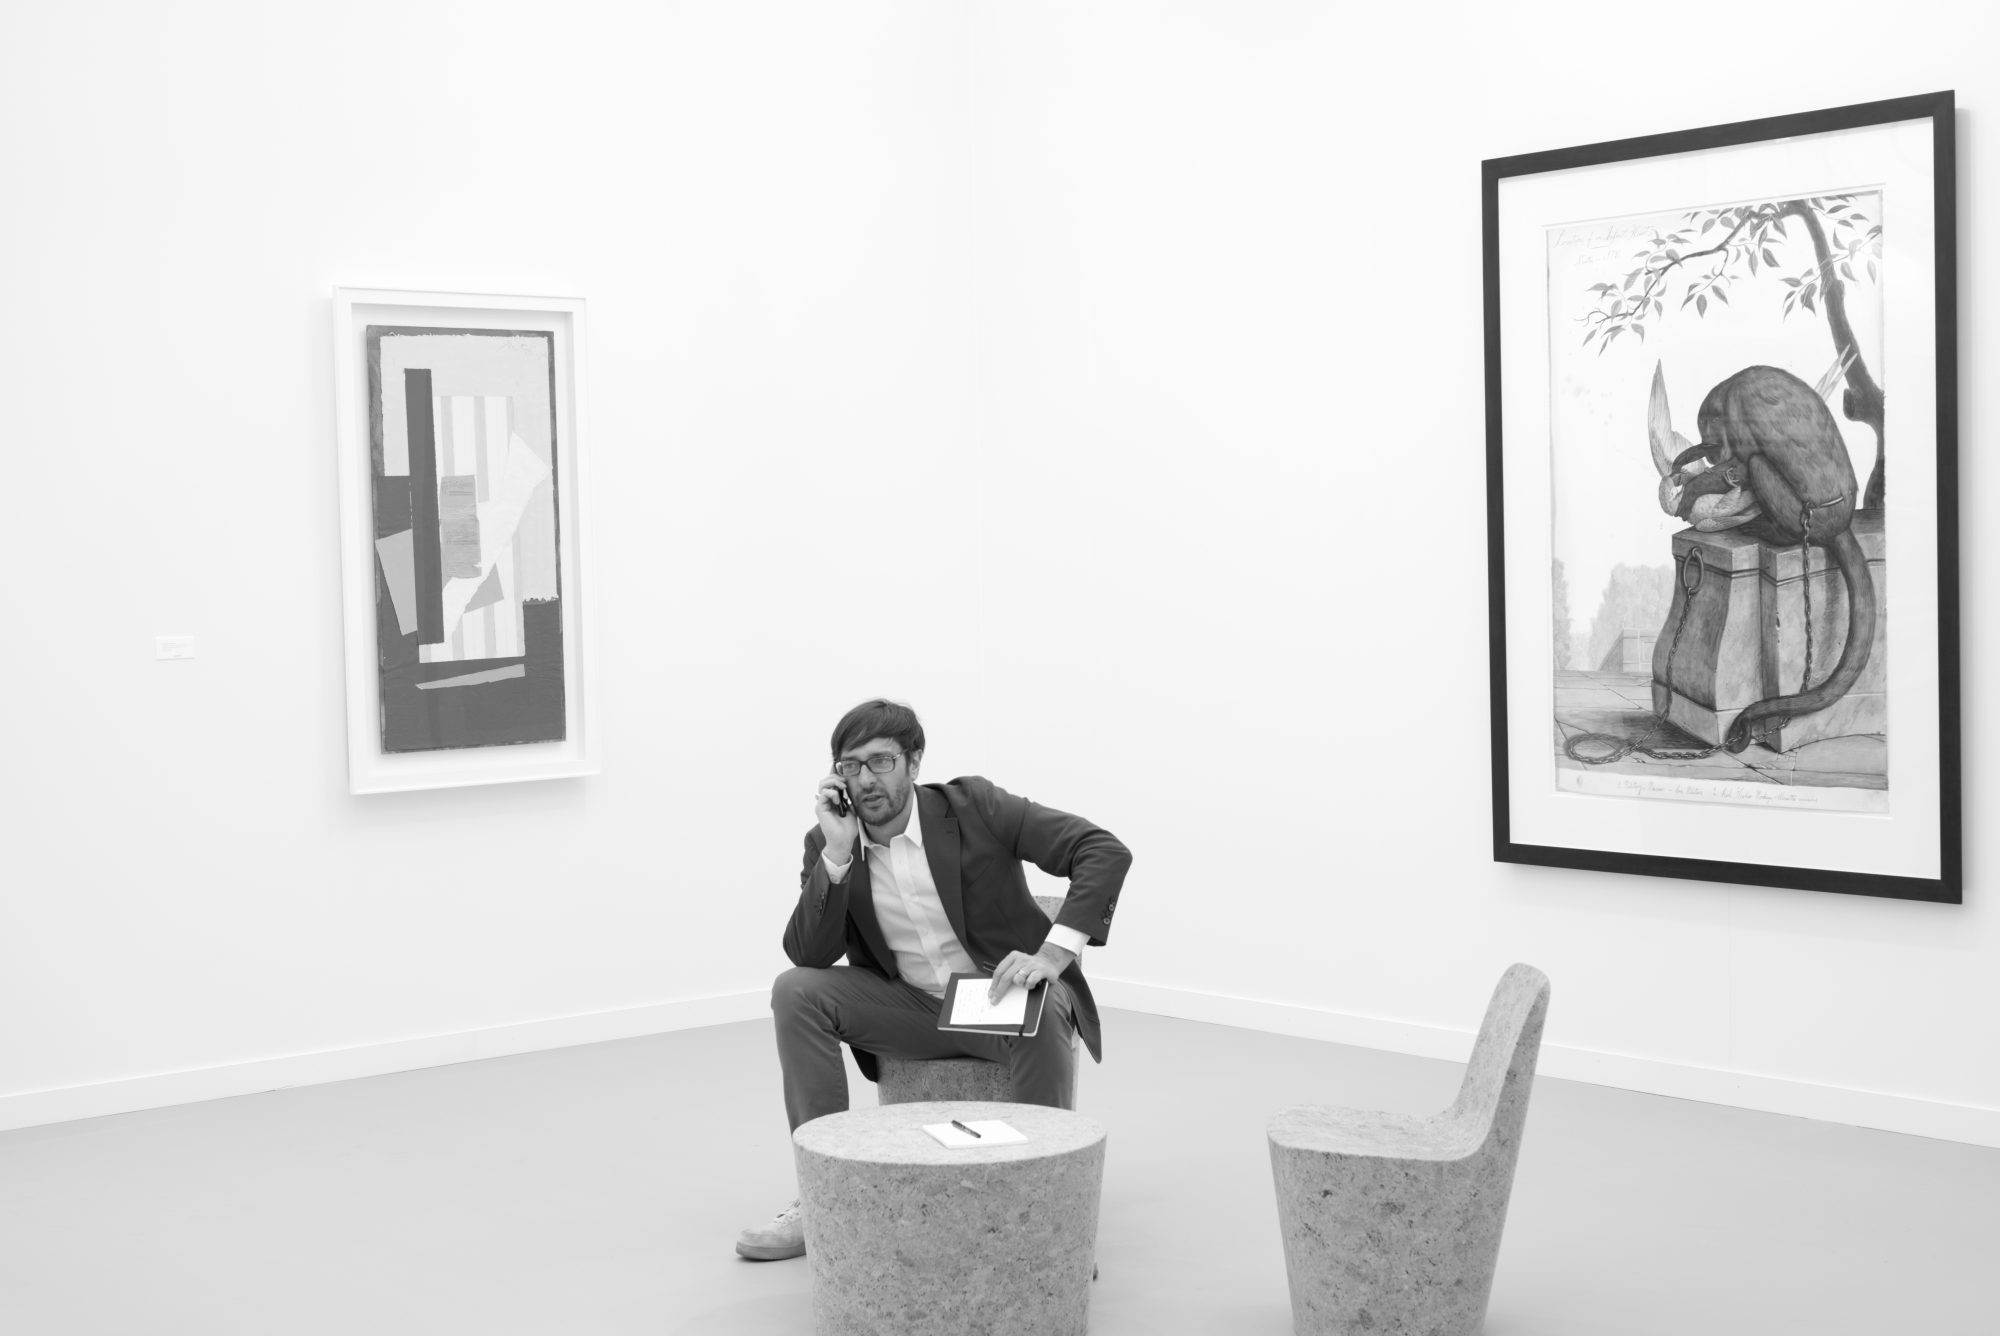 A man sits on a chair between two pieces of art and speaks on the phone.